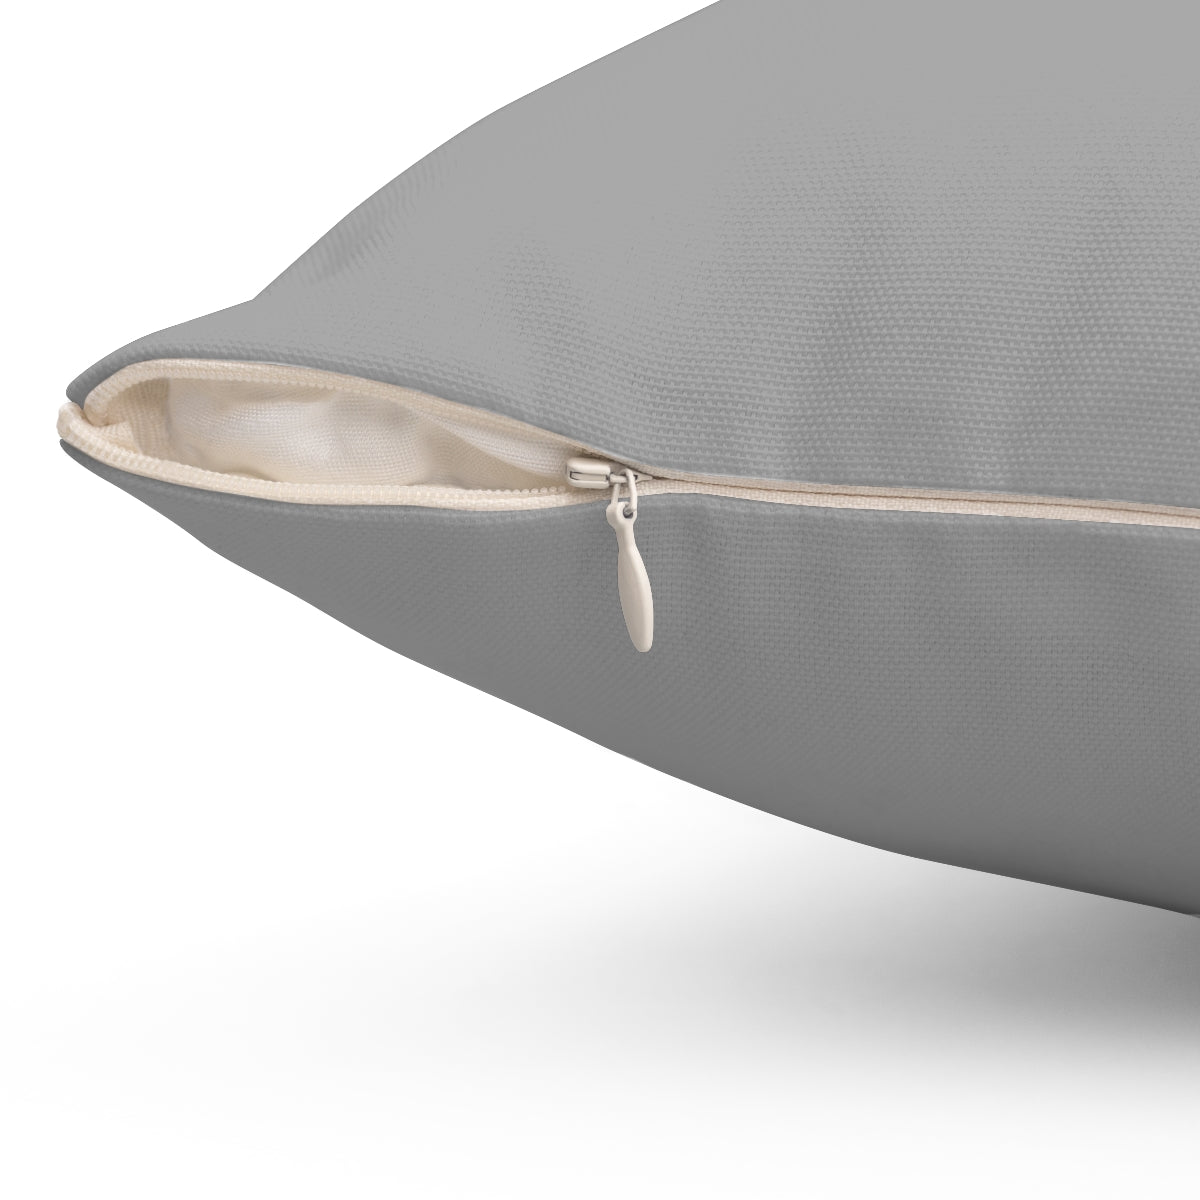 Affirmative “Elevate” Square Pillow